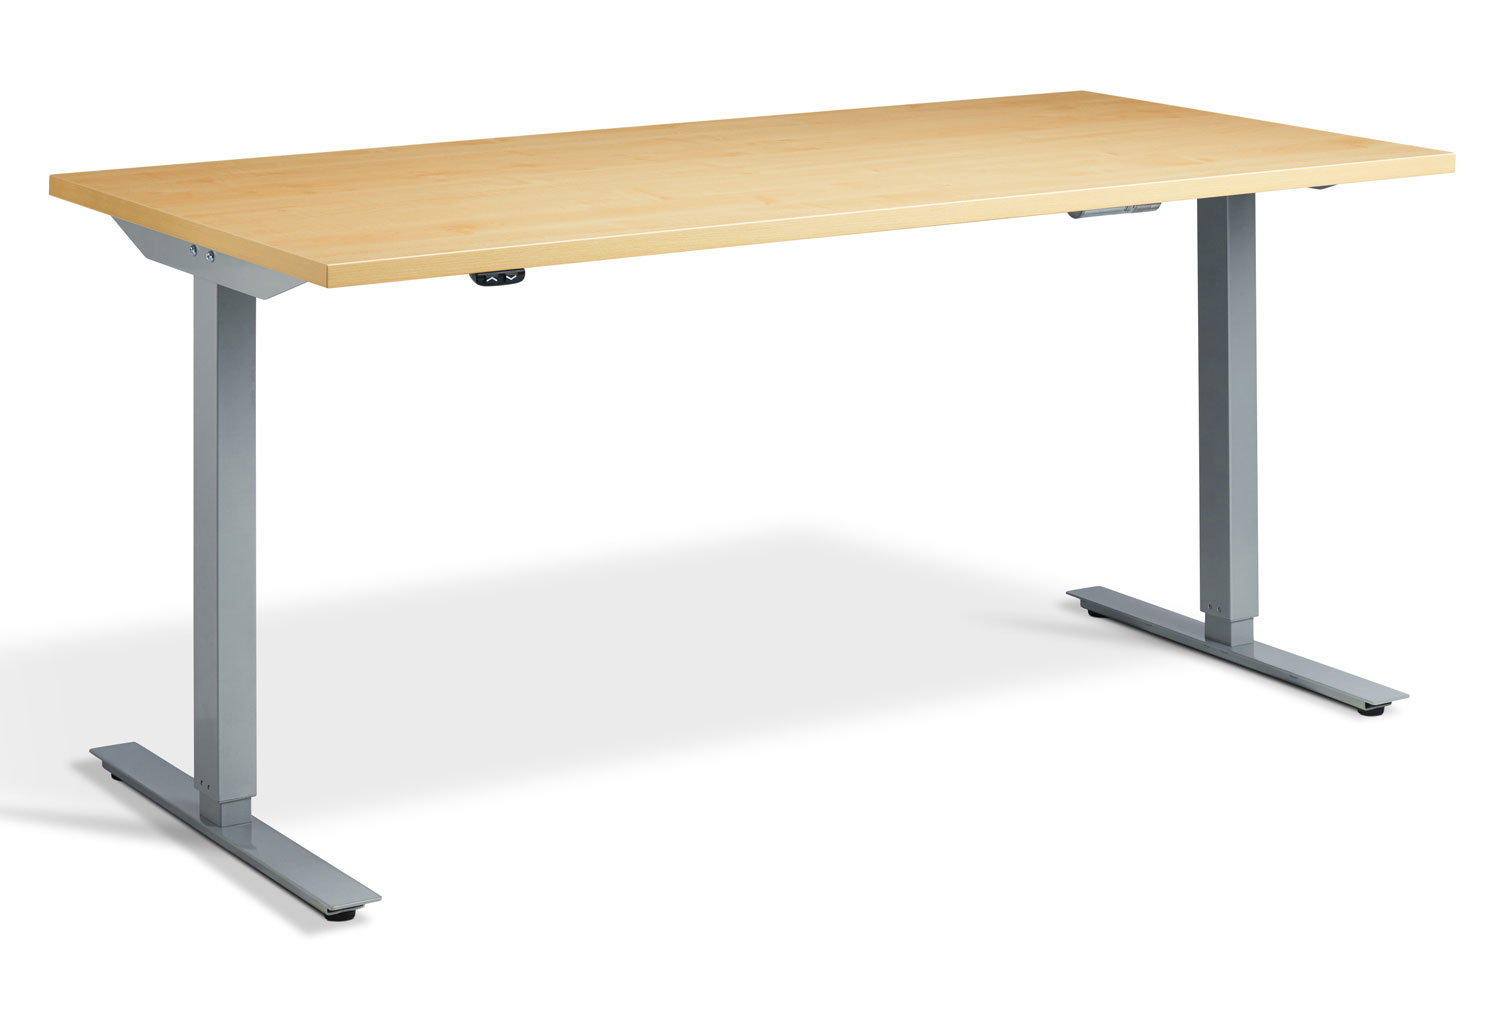 Calgary Dual Motor Height Adjustable Office Desk, 180wx80dx70-120h (cm), Silver Frame, Oak, Express Delivery